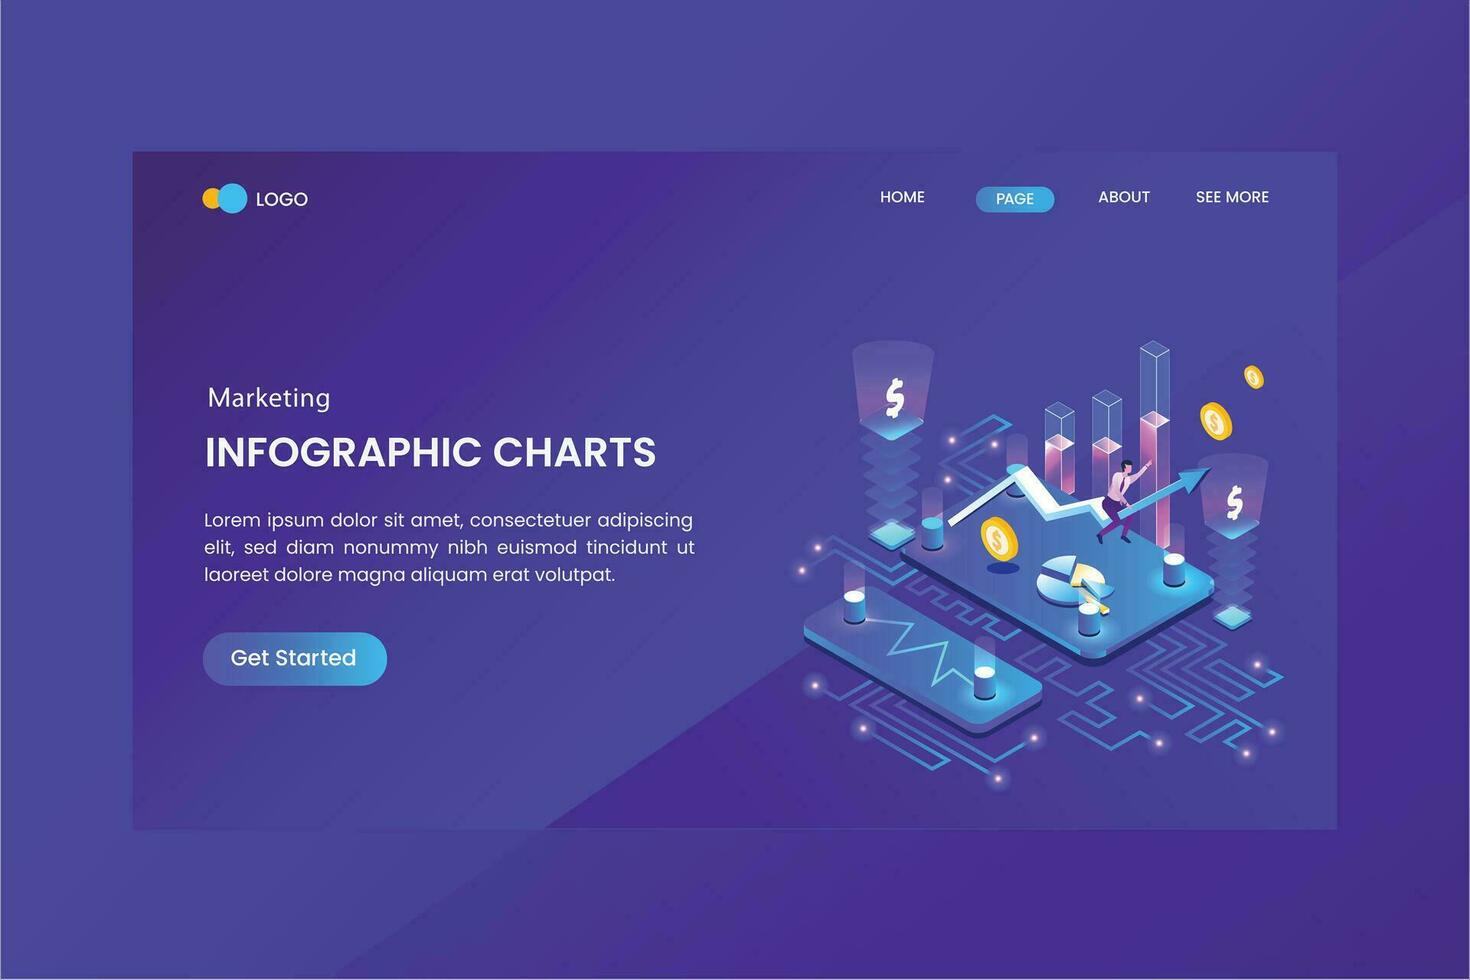 Marketing Infographic Charts Isometric Concept Landing Page vector